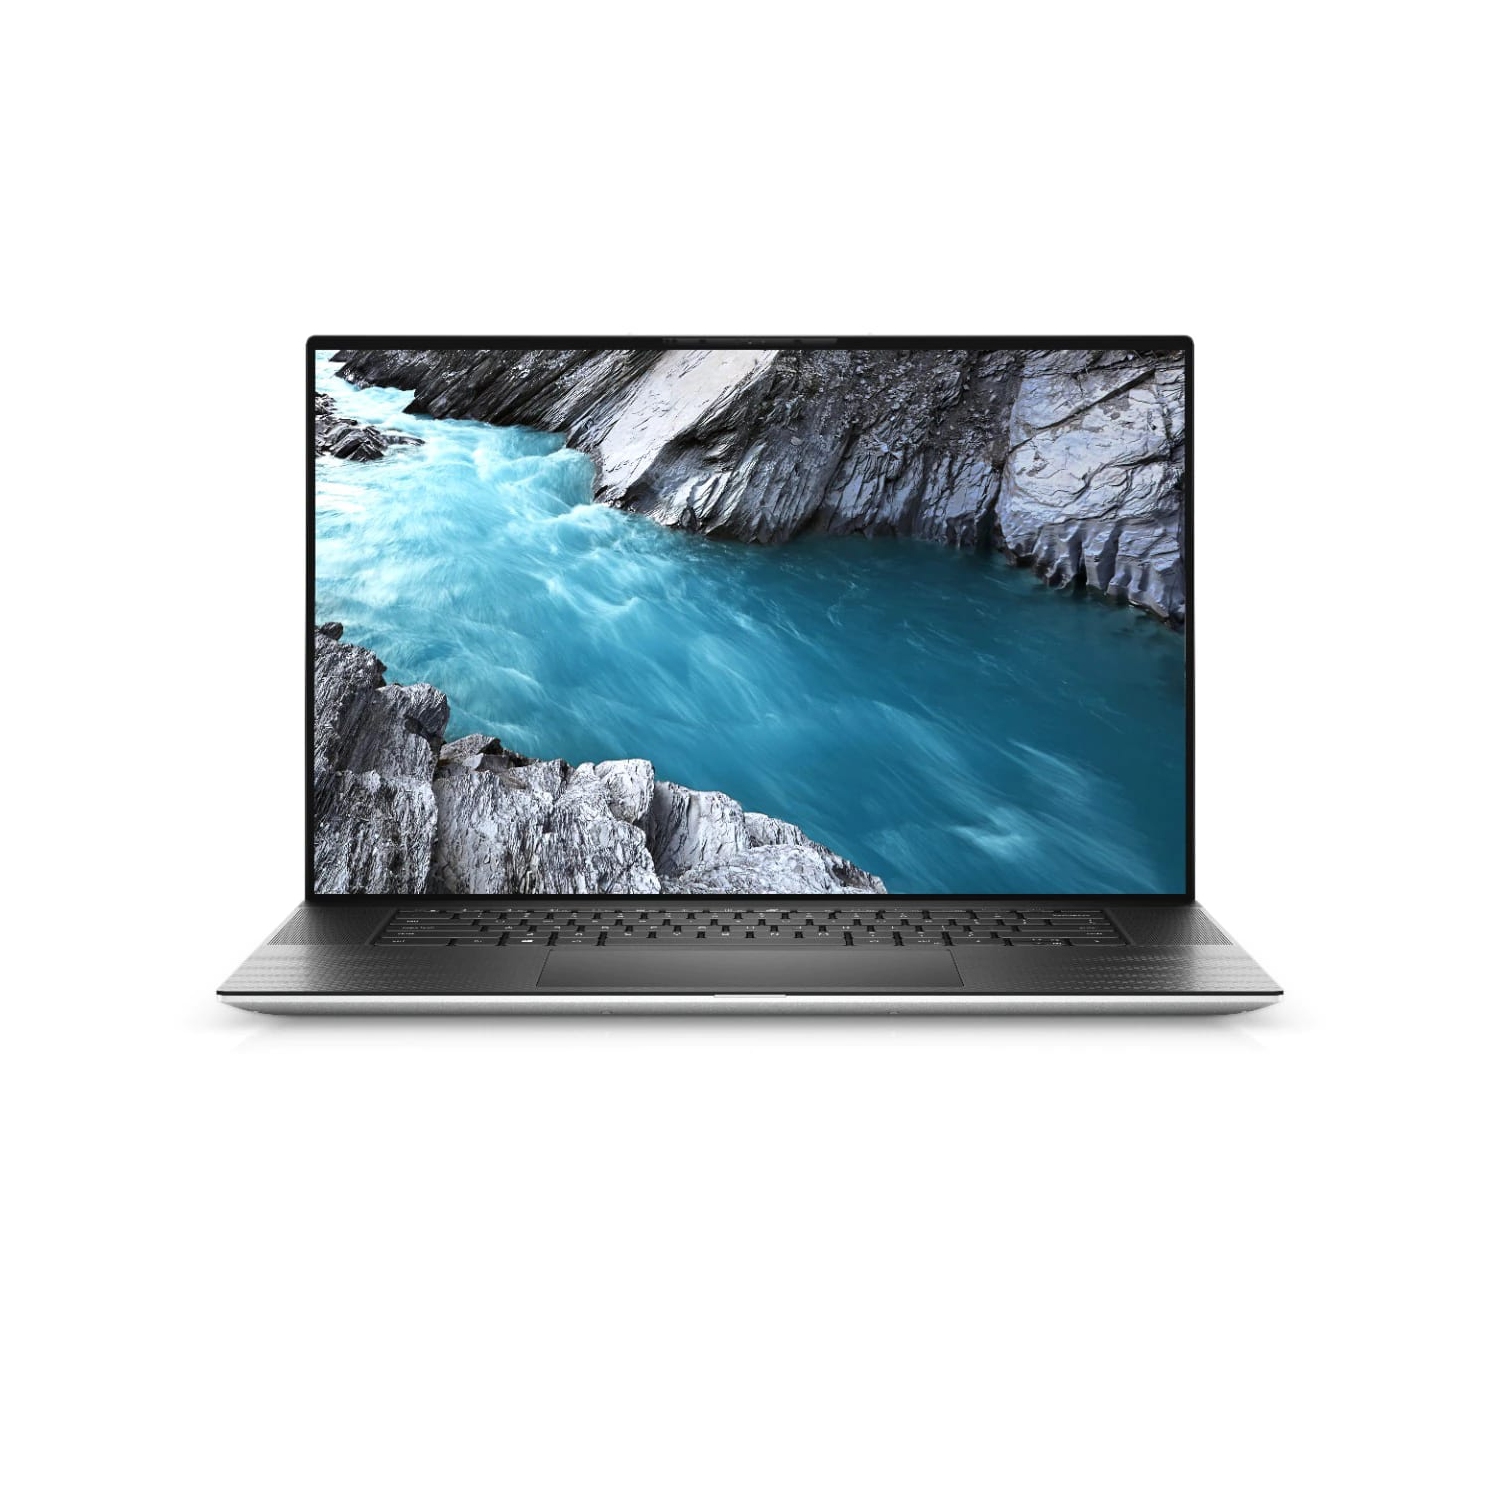 Refurbished (Excellent) - Dell XPS 17 9700 Laptop (2020) | 17" FHD+ | Core i9 - 512GB SSD - 64GB RAM - RTX 2060 | 8 Cores @ 5.3 GHz - 10th Gen CPU Certified Refurbished